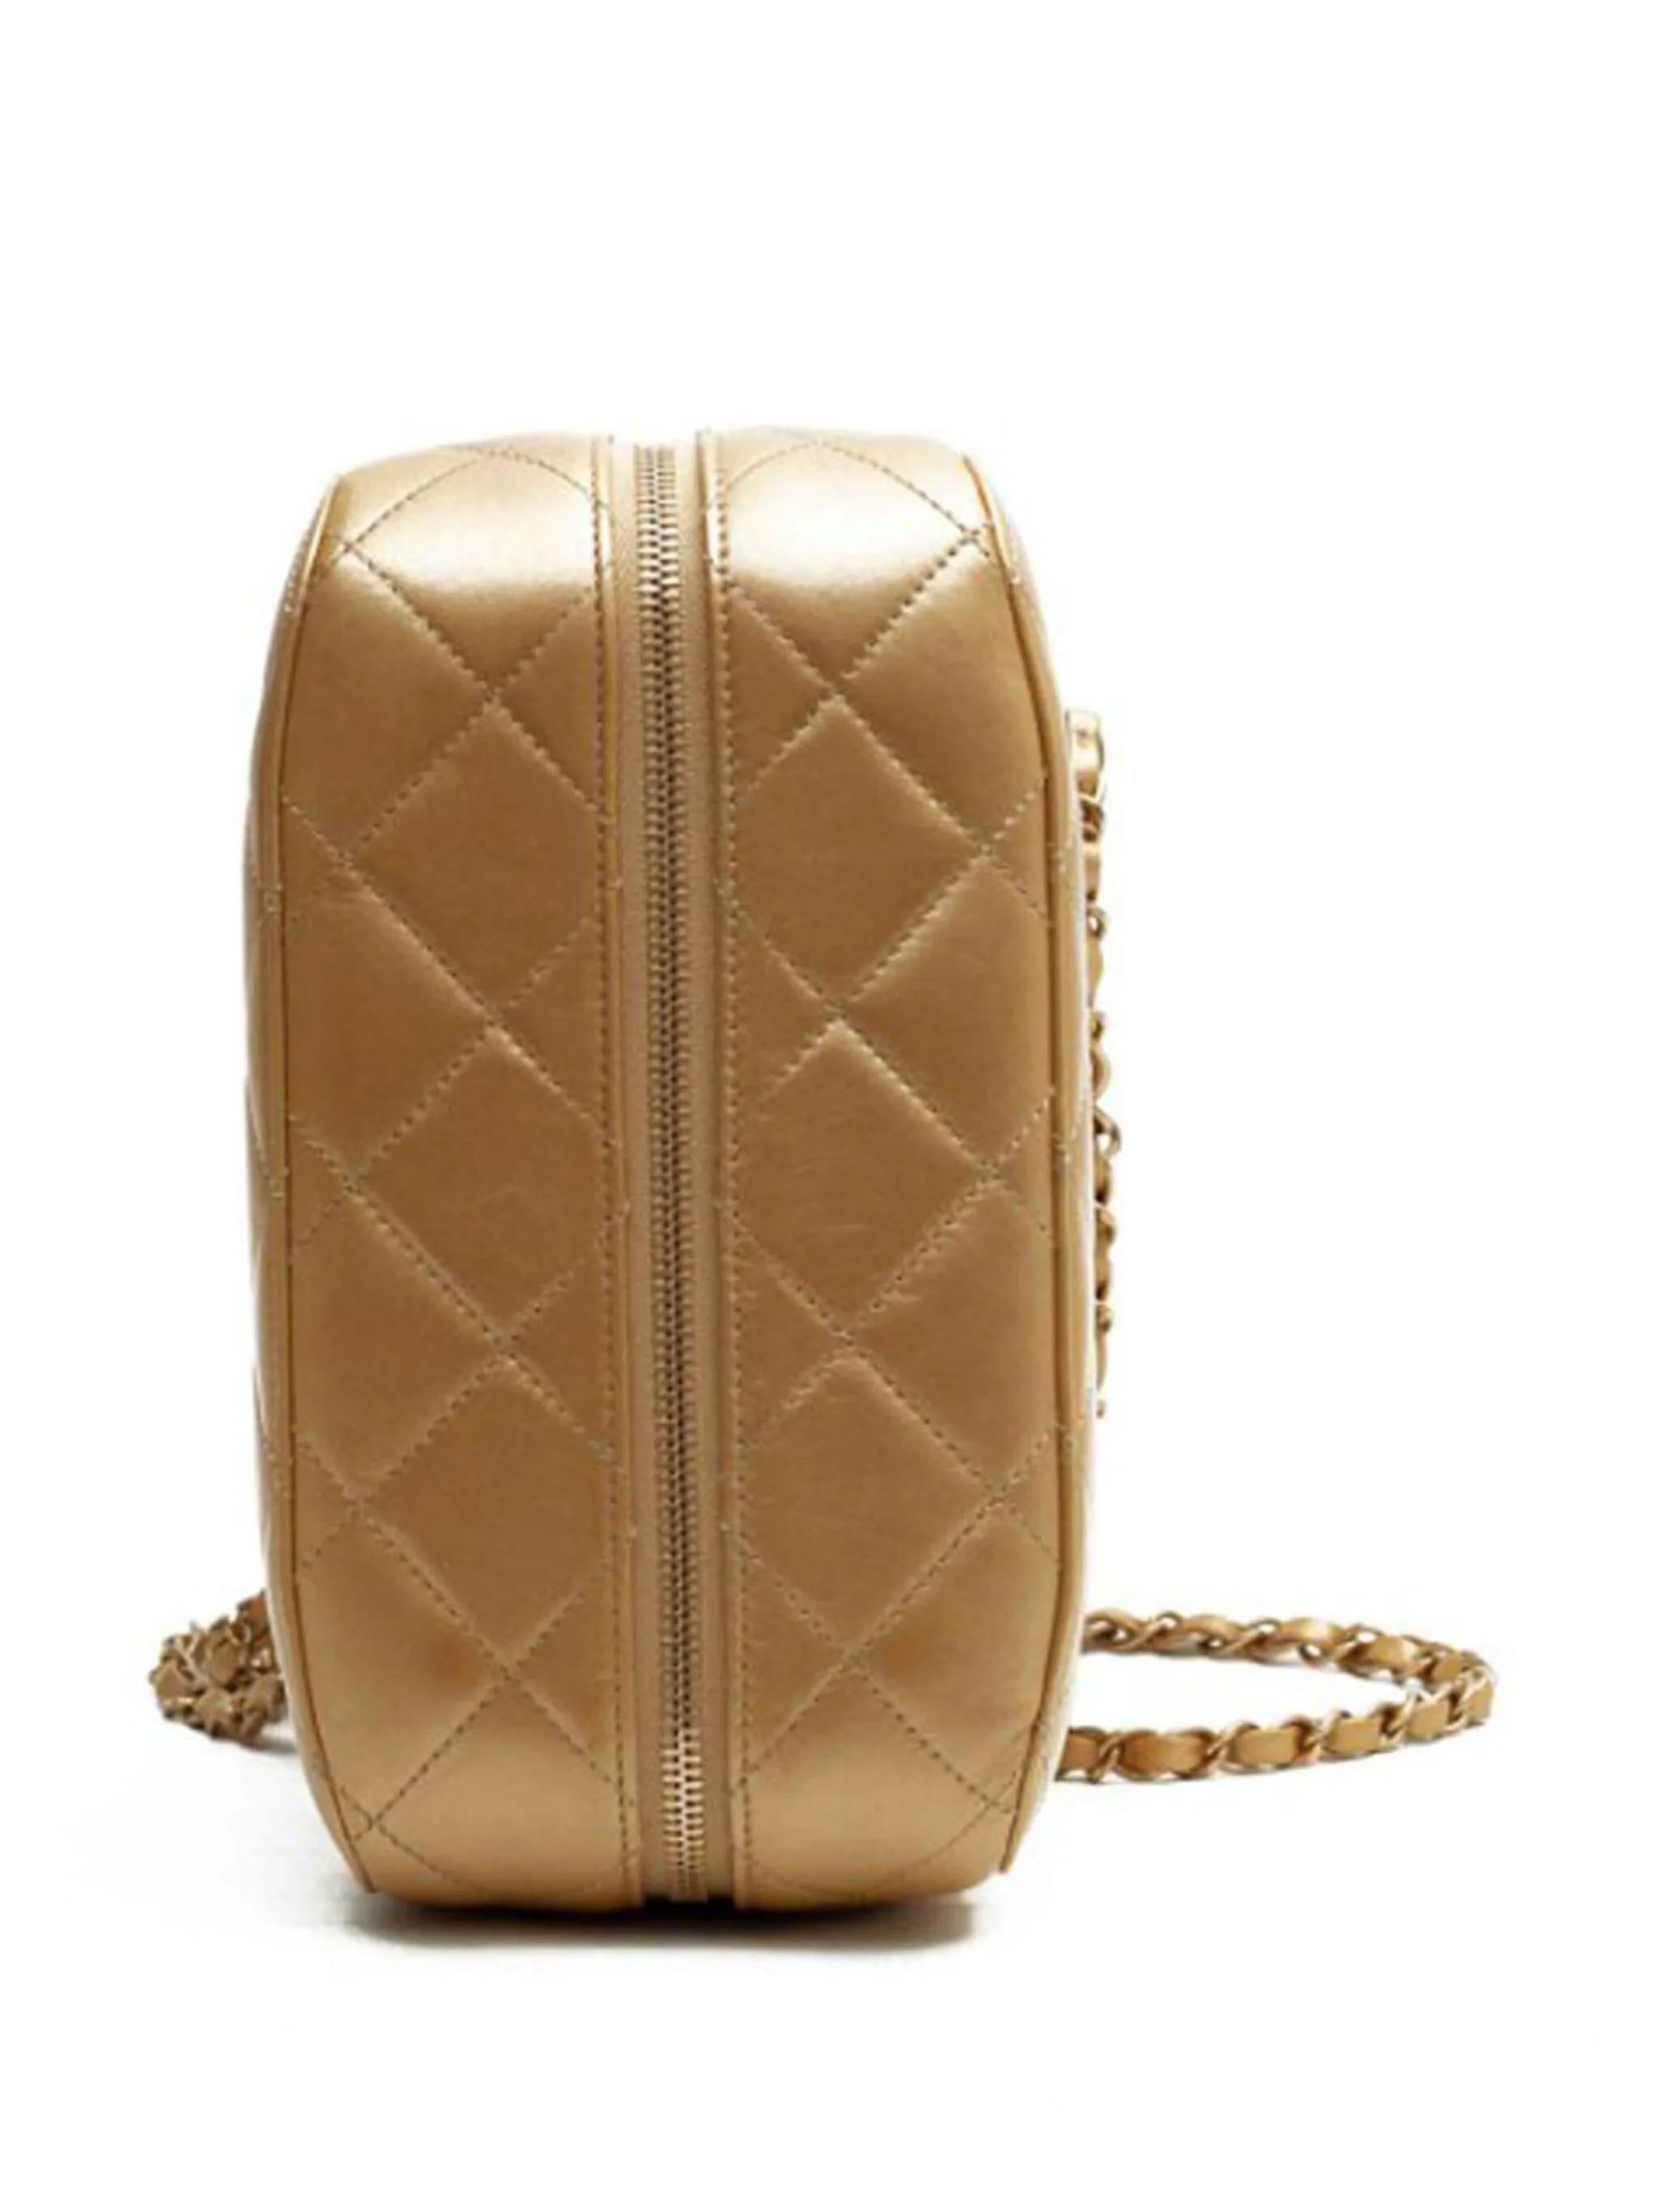 Chanel 2015 Paris Dubai Night Gas Tank Jerry Can Statement Bag Collector's Item For Sale 1